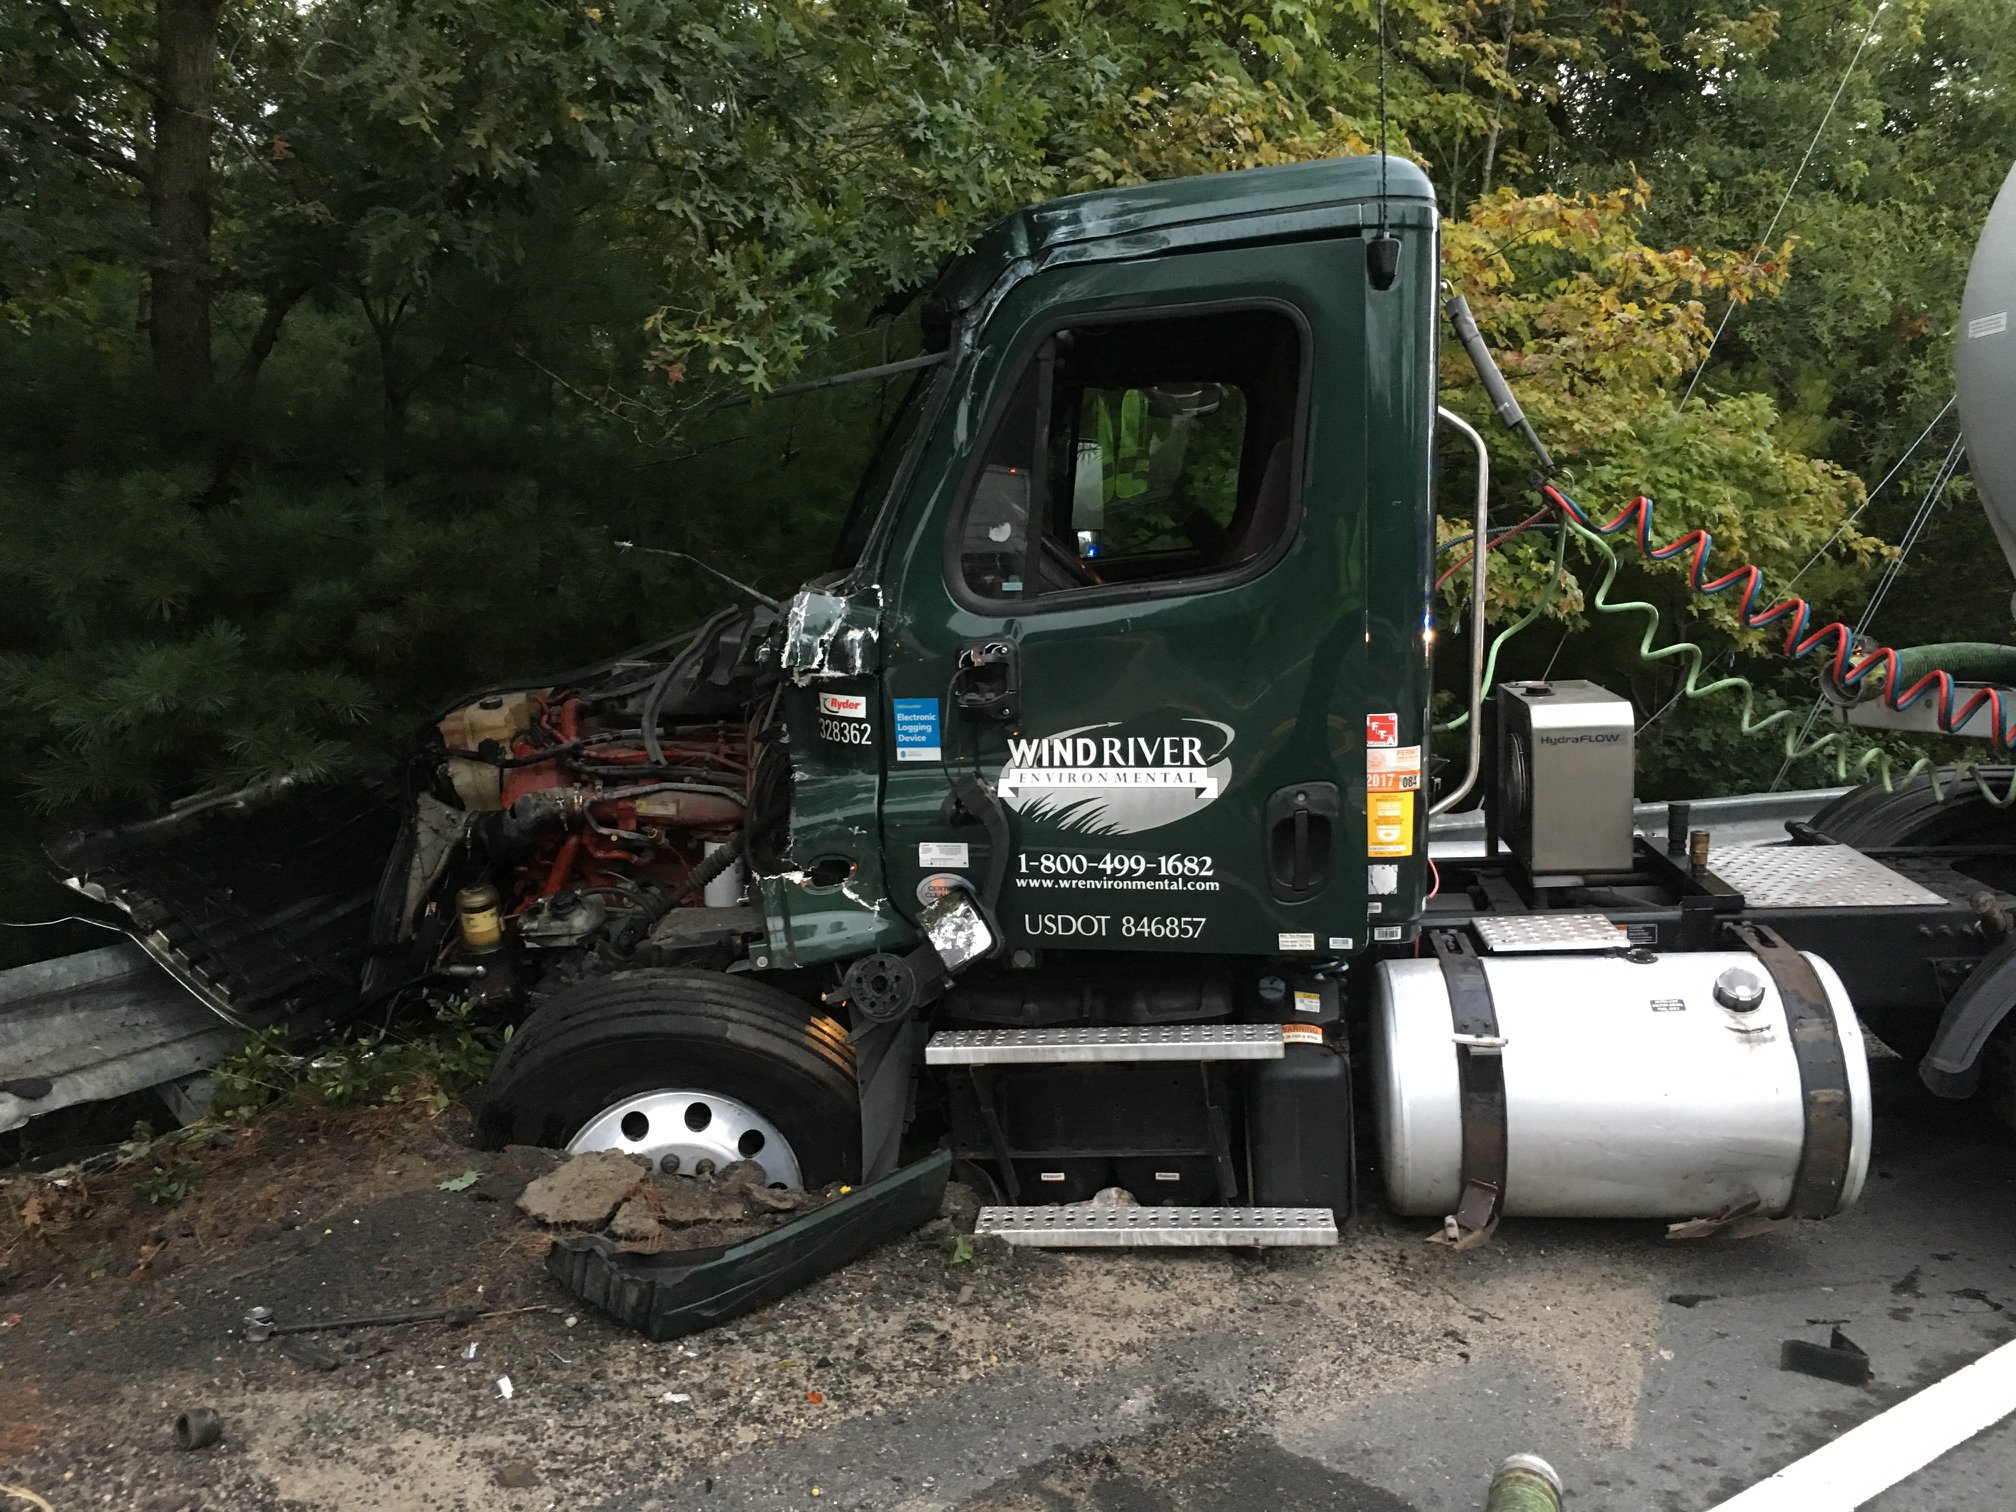 garbage truck and tractor trailer collide. (carver pd)